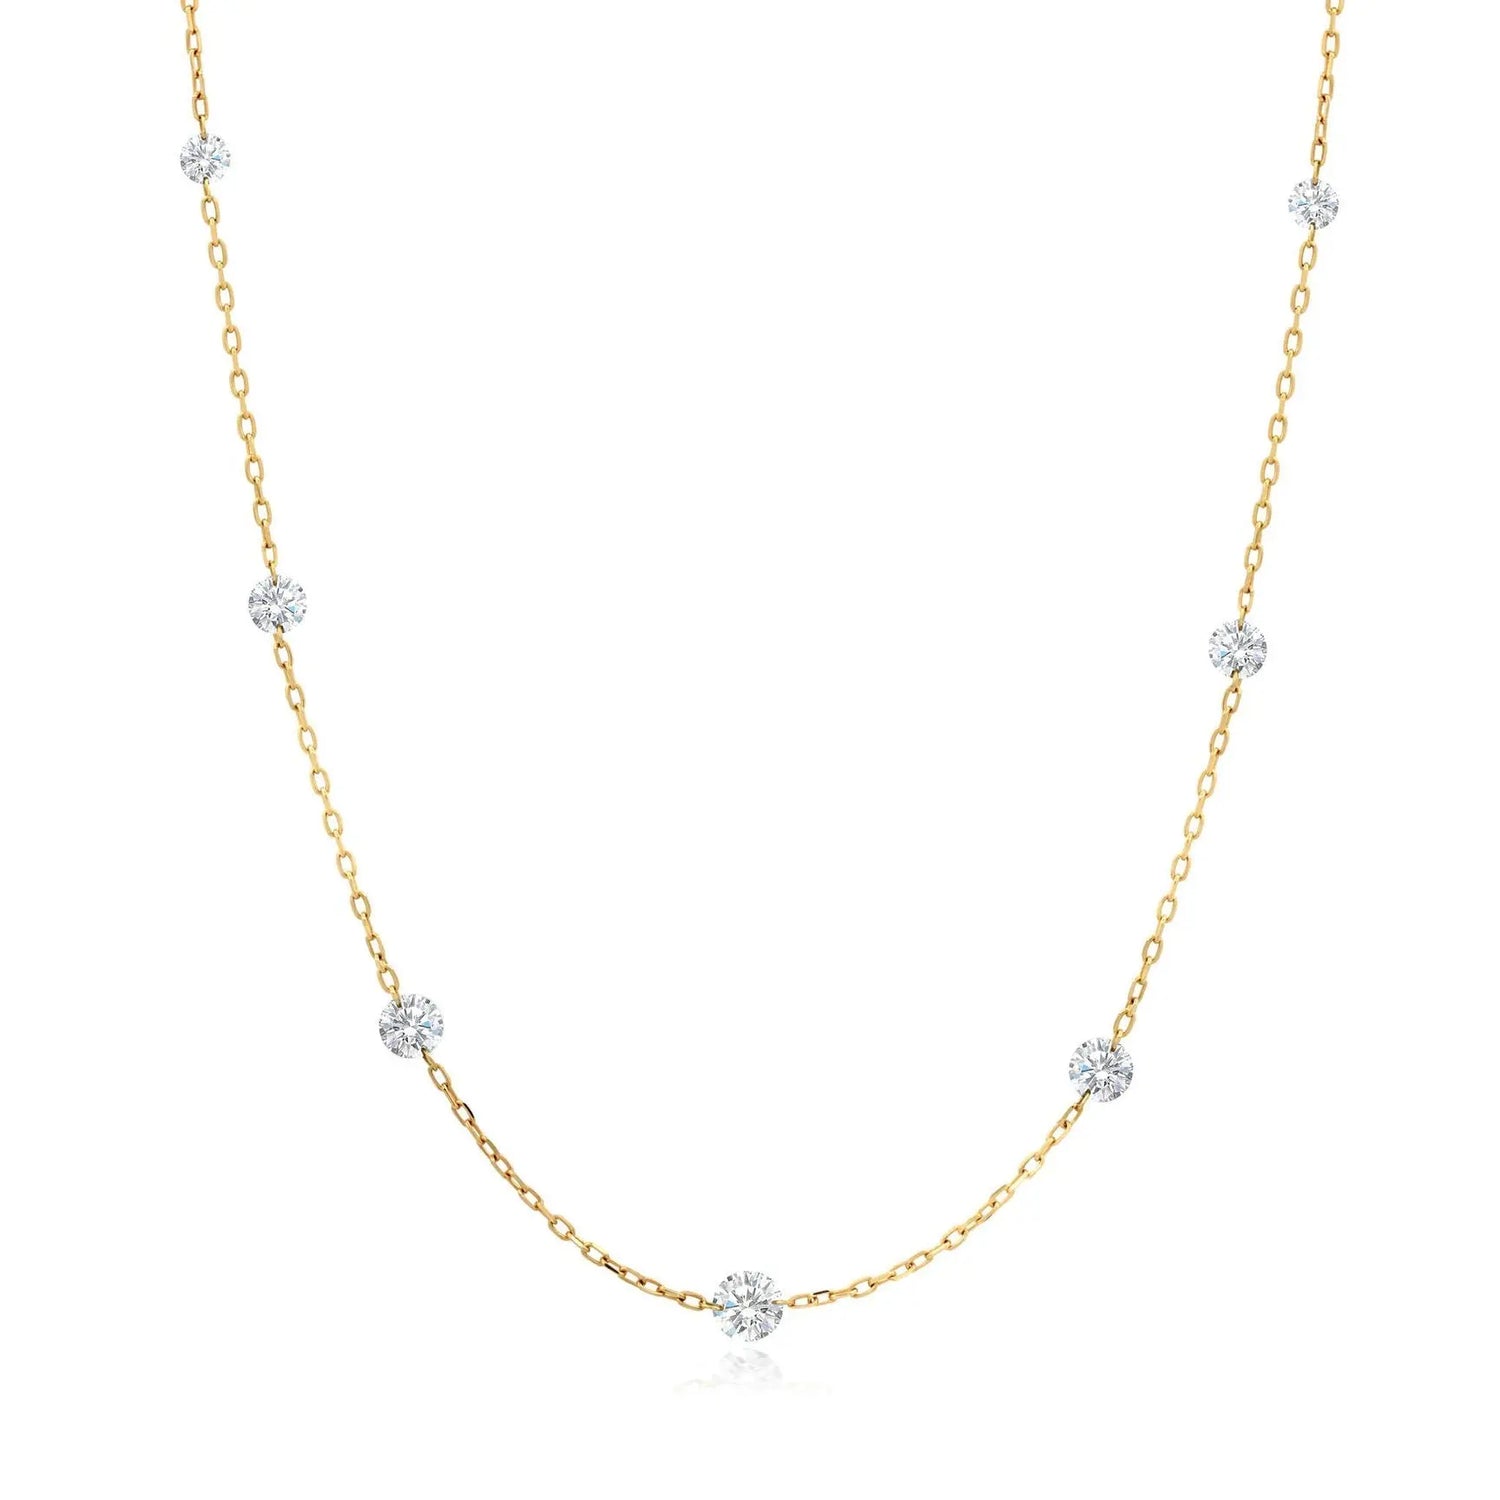 18K yellow gold floating diamond station necklace. Can be worn alone and a great stacking piece  Details:  Gemstone: 1/2 Carats (7 pieces) of G-H Color White Diamonds  Length: 18 inches and adjustable Closure: Spring Ring Designed by Graziela Gems